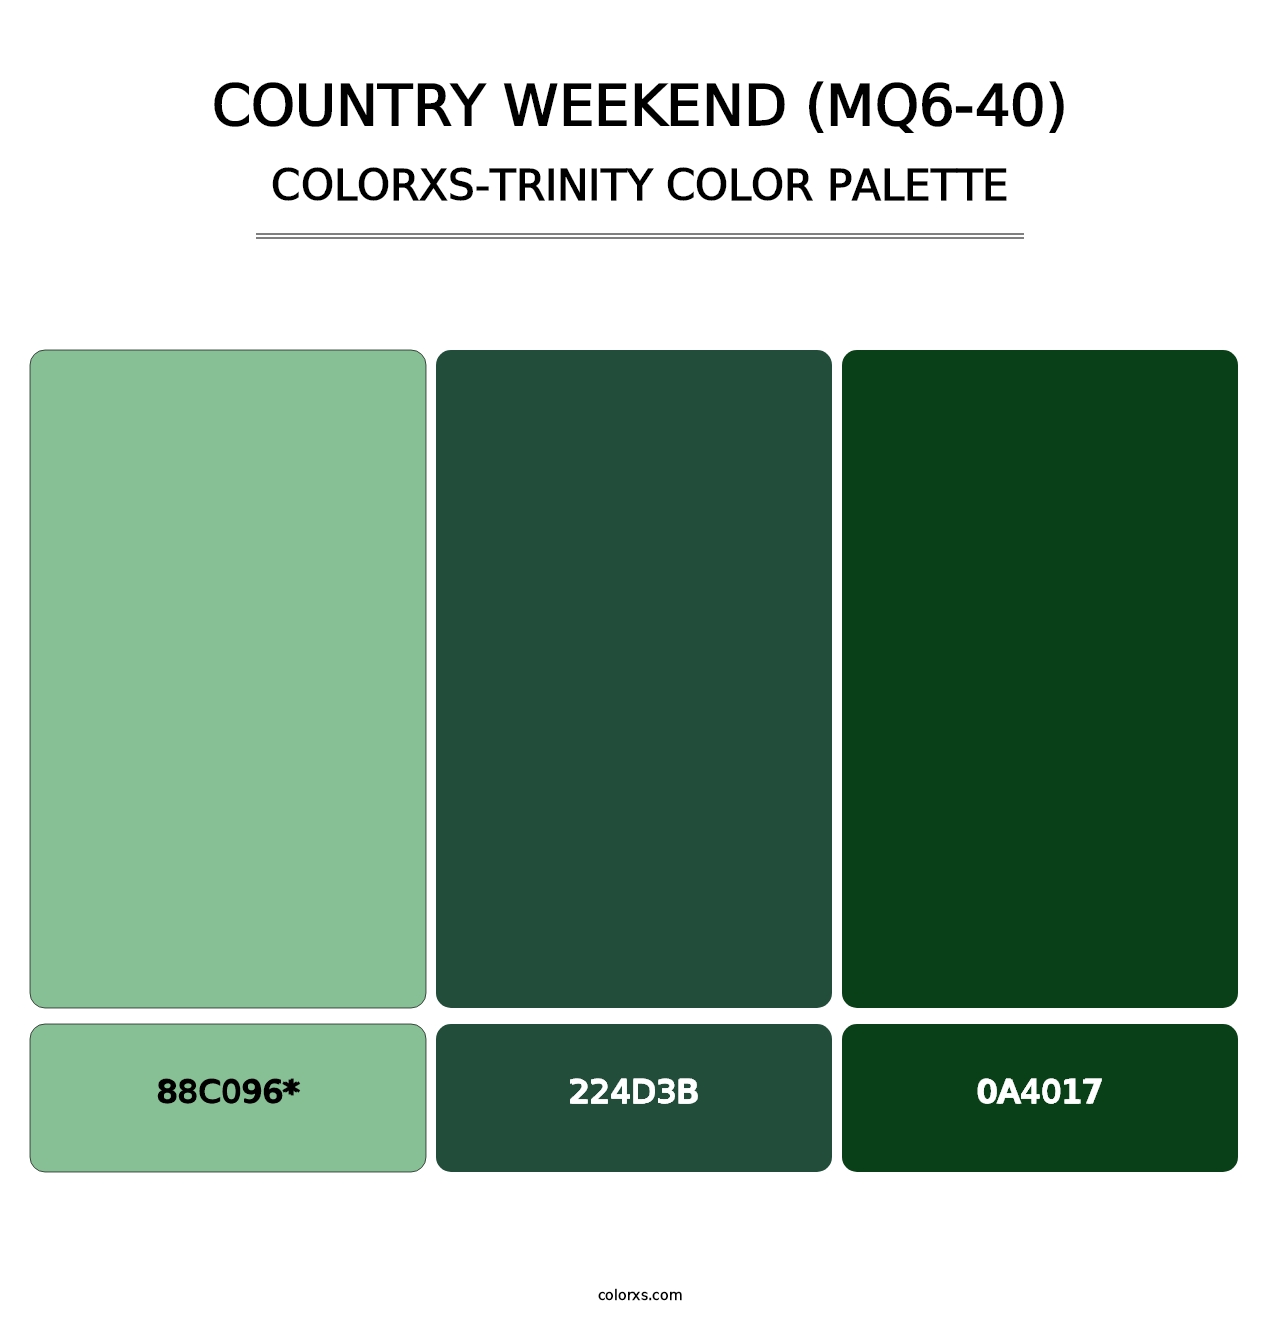 Country Weekend (MQ6-40) - Colorxs Trinity Palette